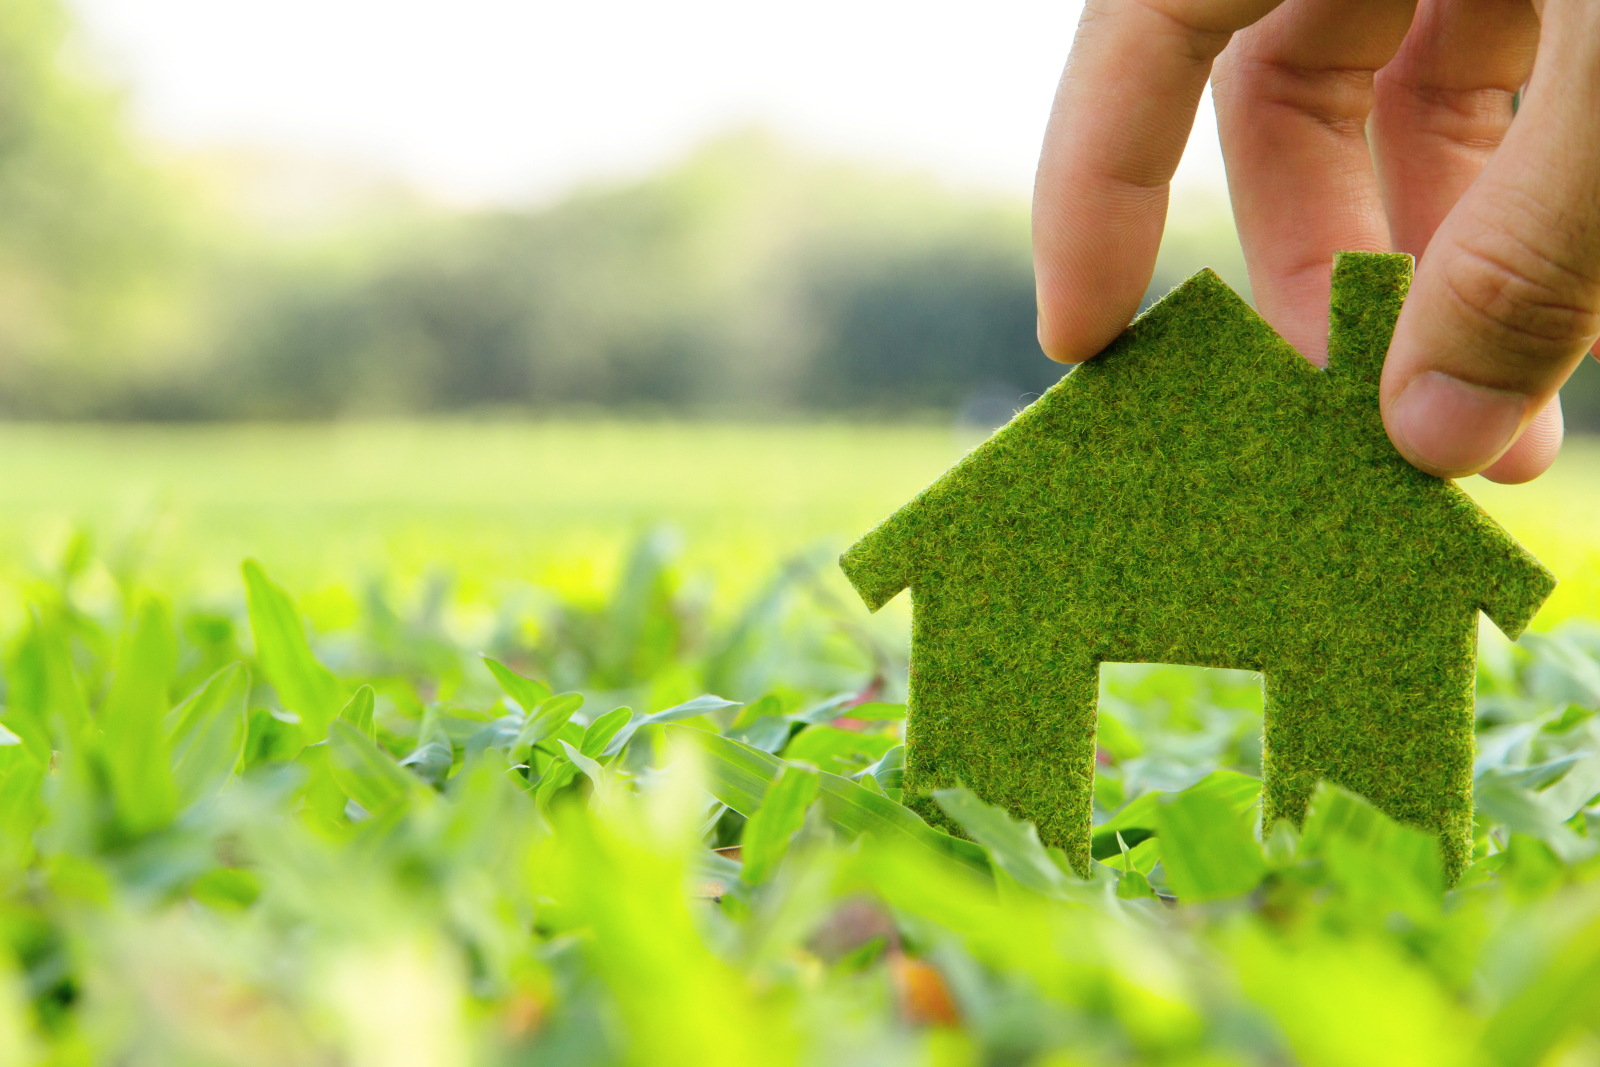 Image of a hand holding a green piece of fabric shaped like a house in a grass field.